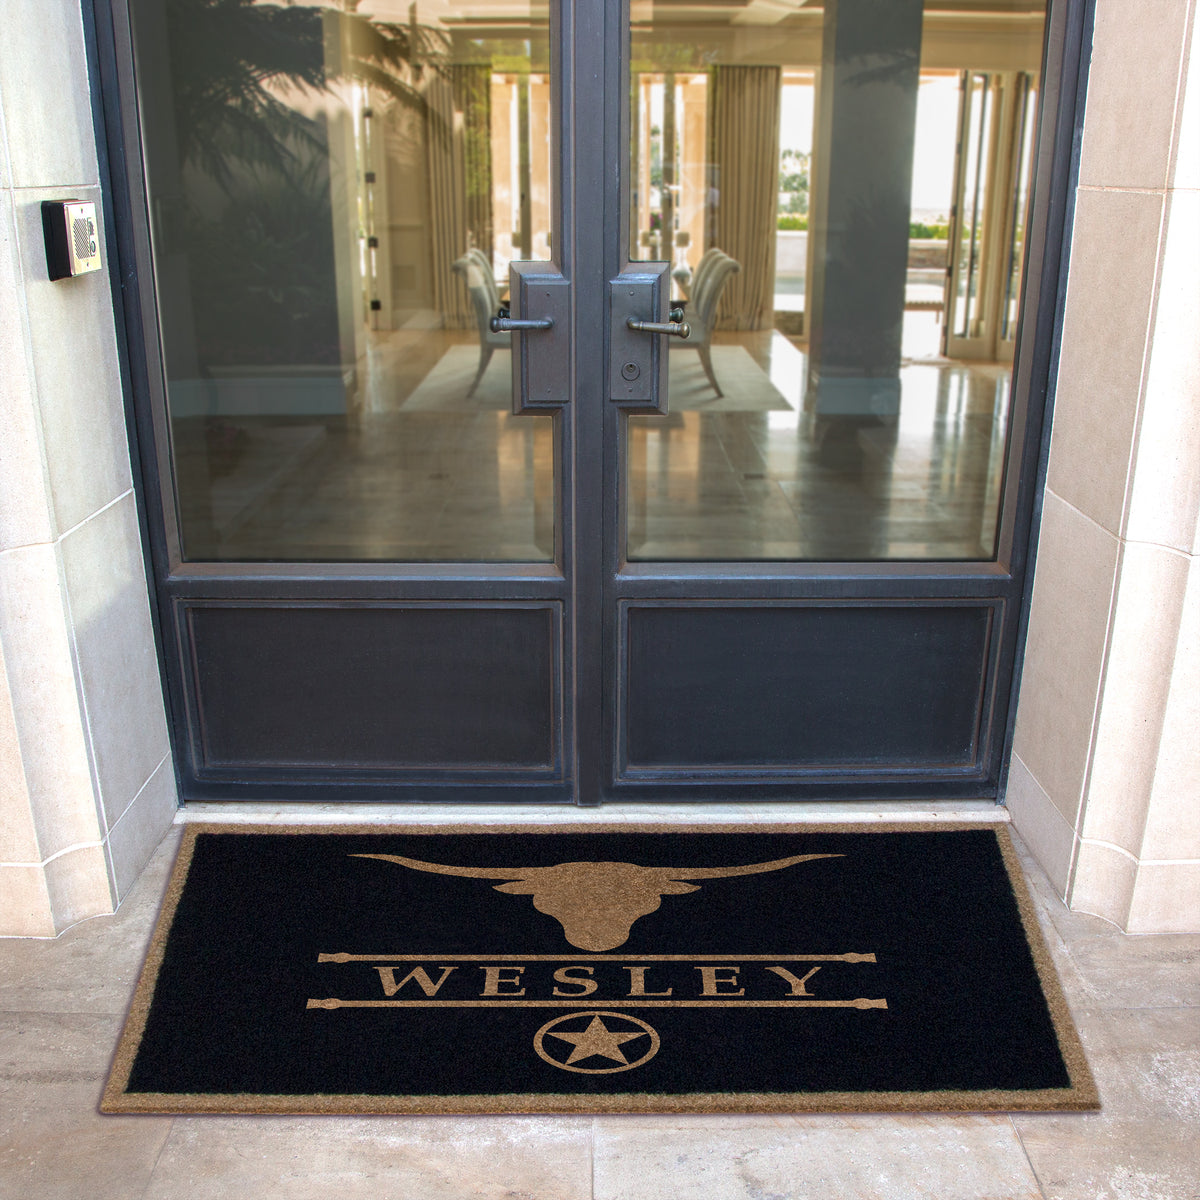 Infinity Custom Mats™ All-Weather Personalized Door Mat - STYLE: WESLEY COLOR:BLACK - rugsthatfit.com